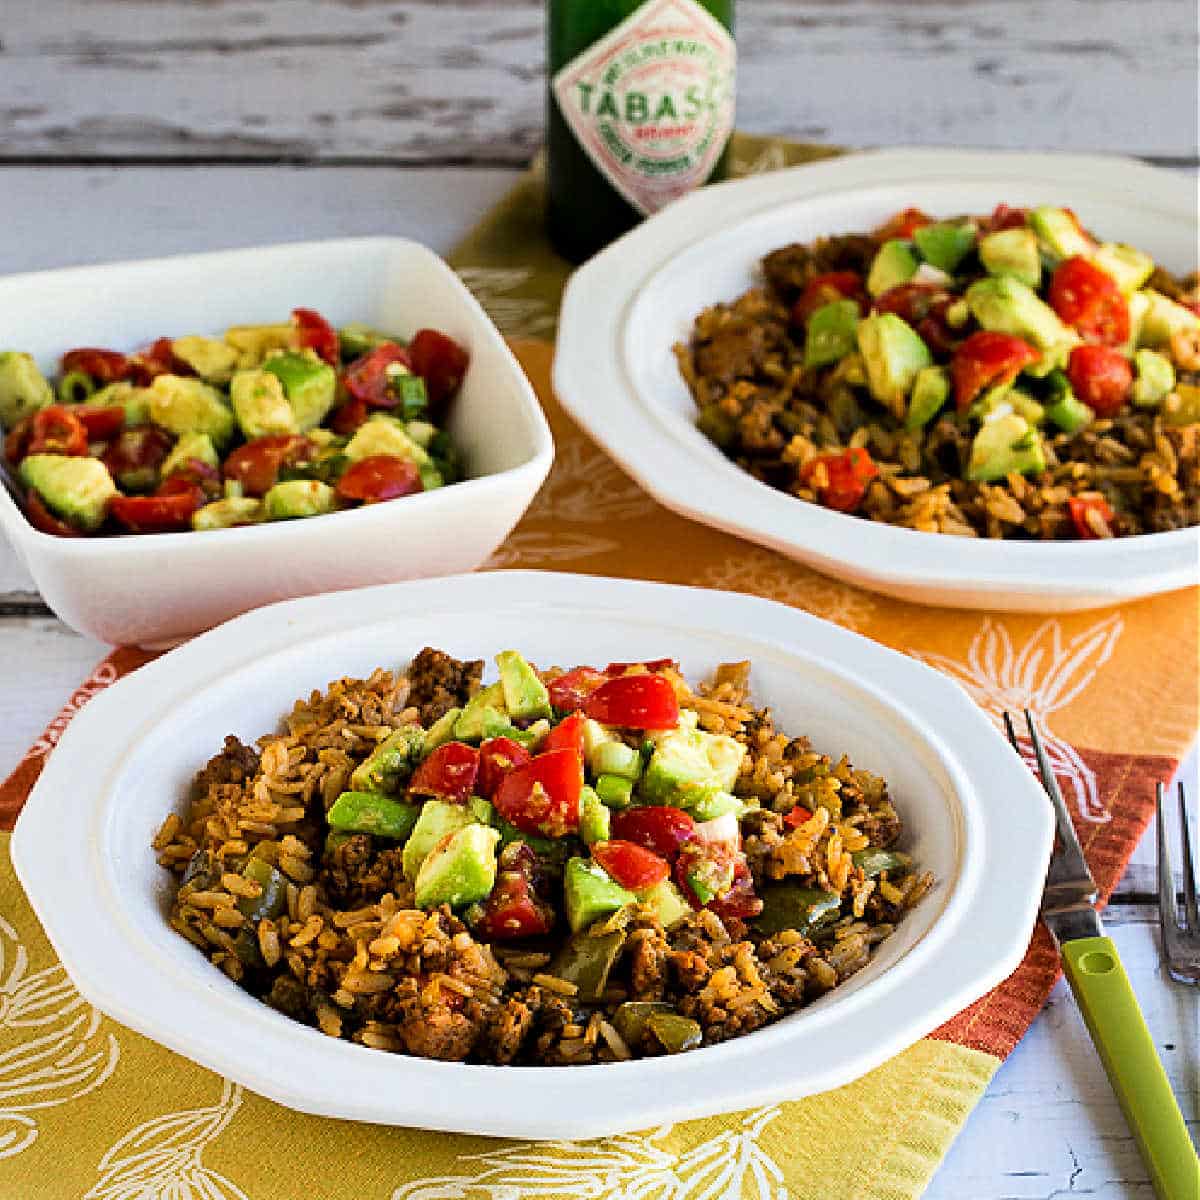 Slow Cooker Turkey Taco Bowls shown in two serving bowls with salsa.